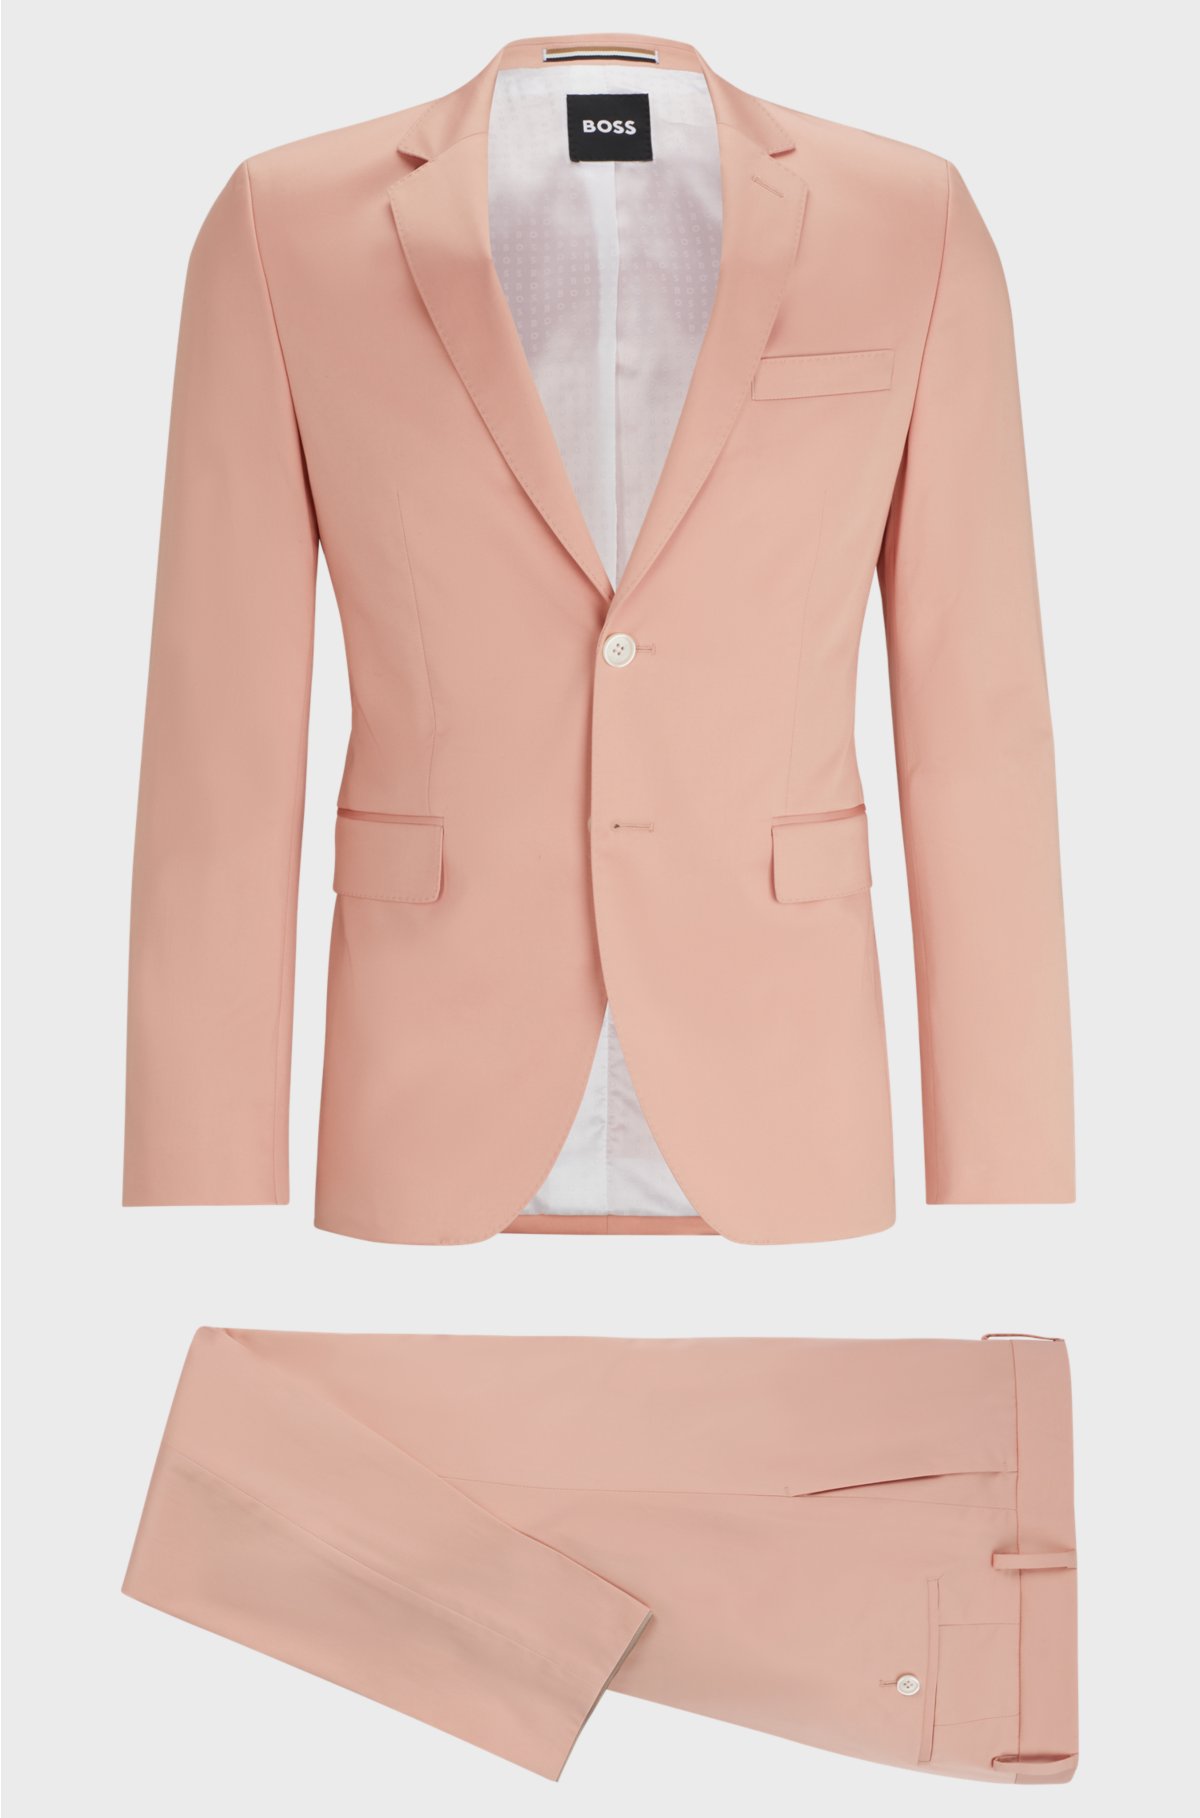 Extra-slim-fit suit in stretch cotton, light pink